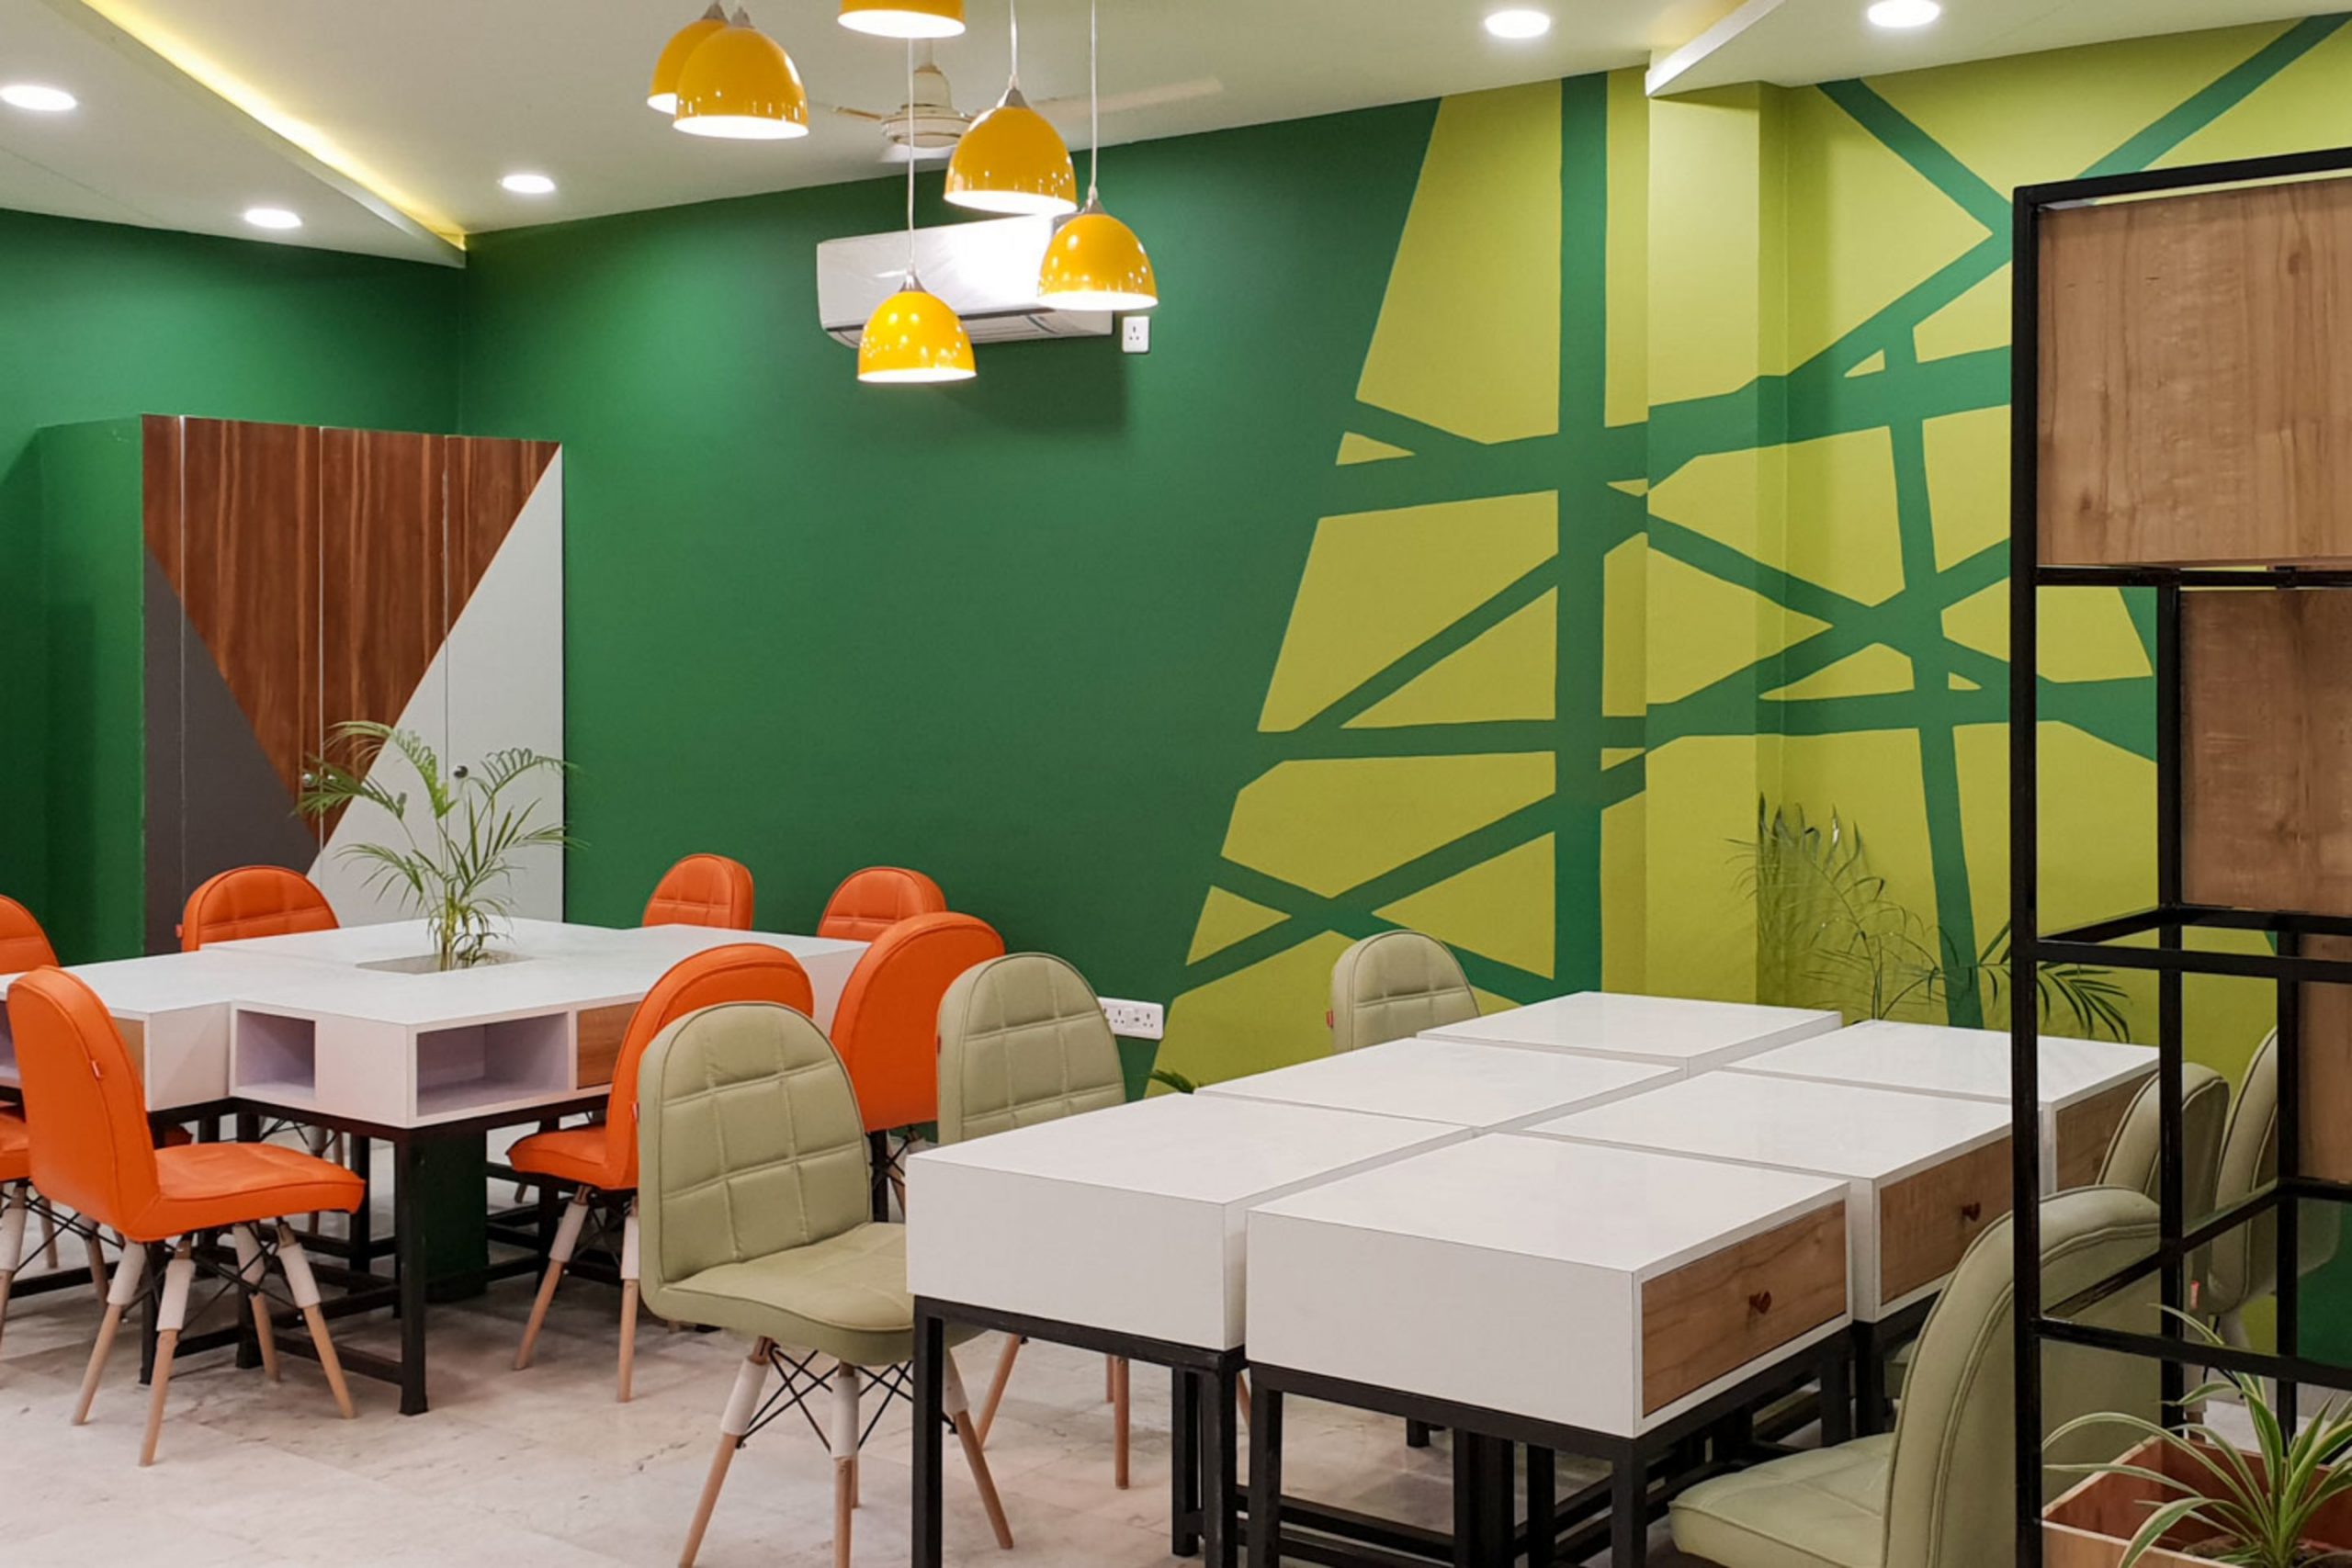 ECORK coworking space in Lucknow